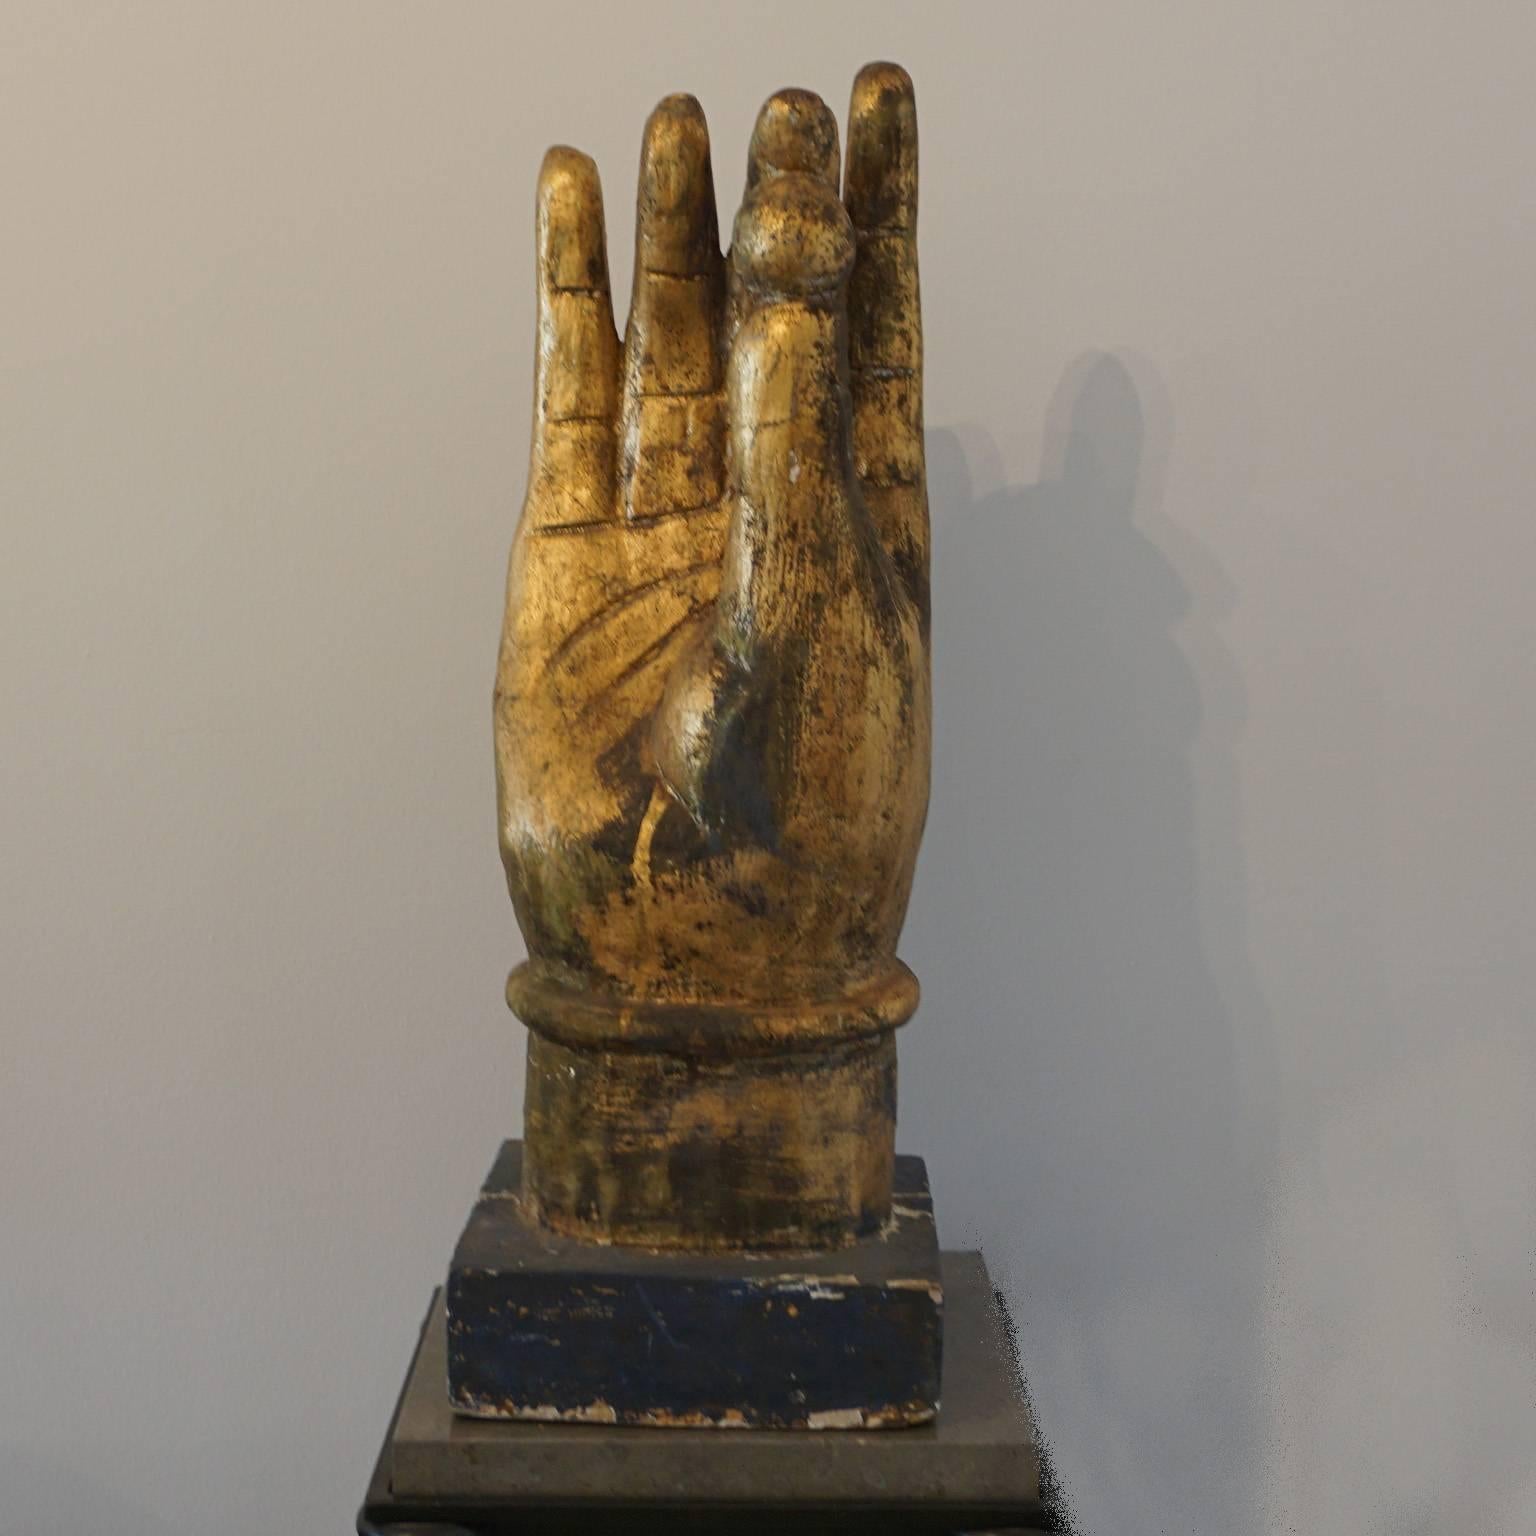 Hand-carved hand holding the pearl of wisdom. The pearl 
was used as a symbol of the most valuable treasure, wisdom,
circa 1880, Burma.